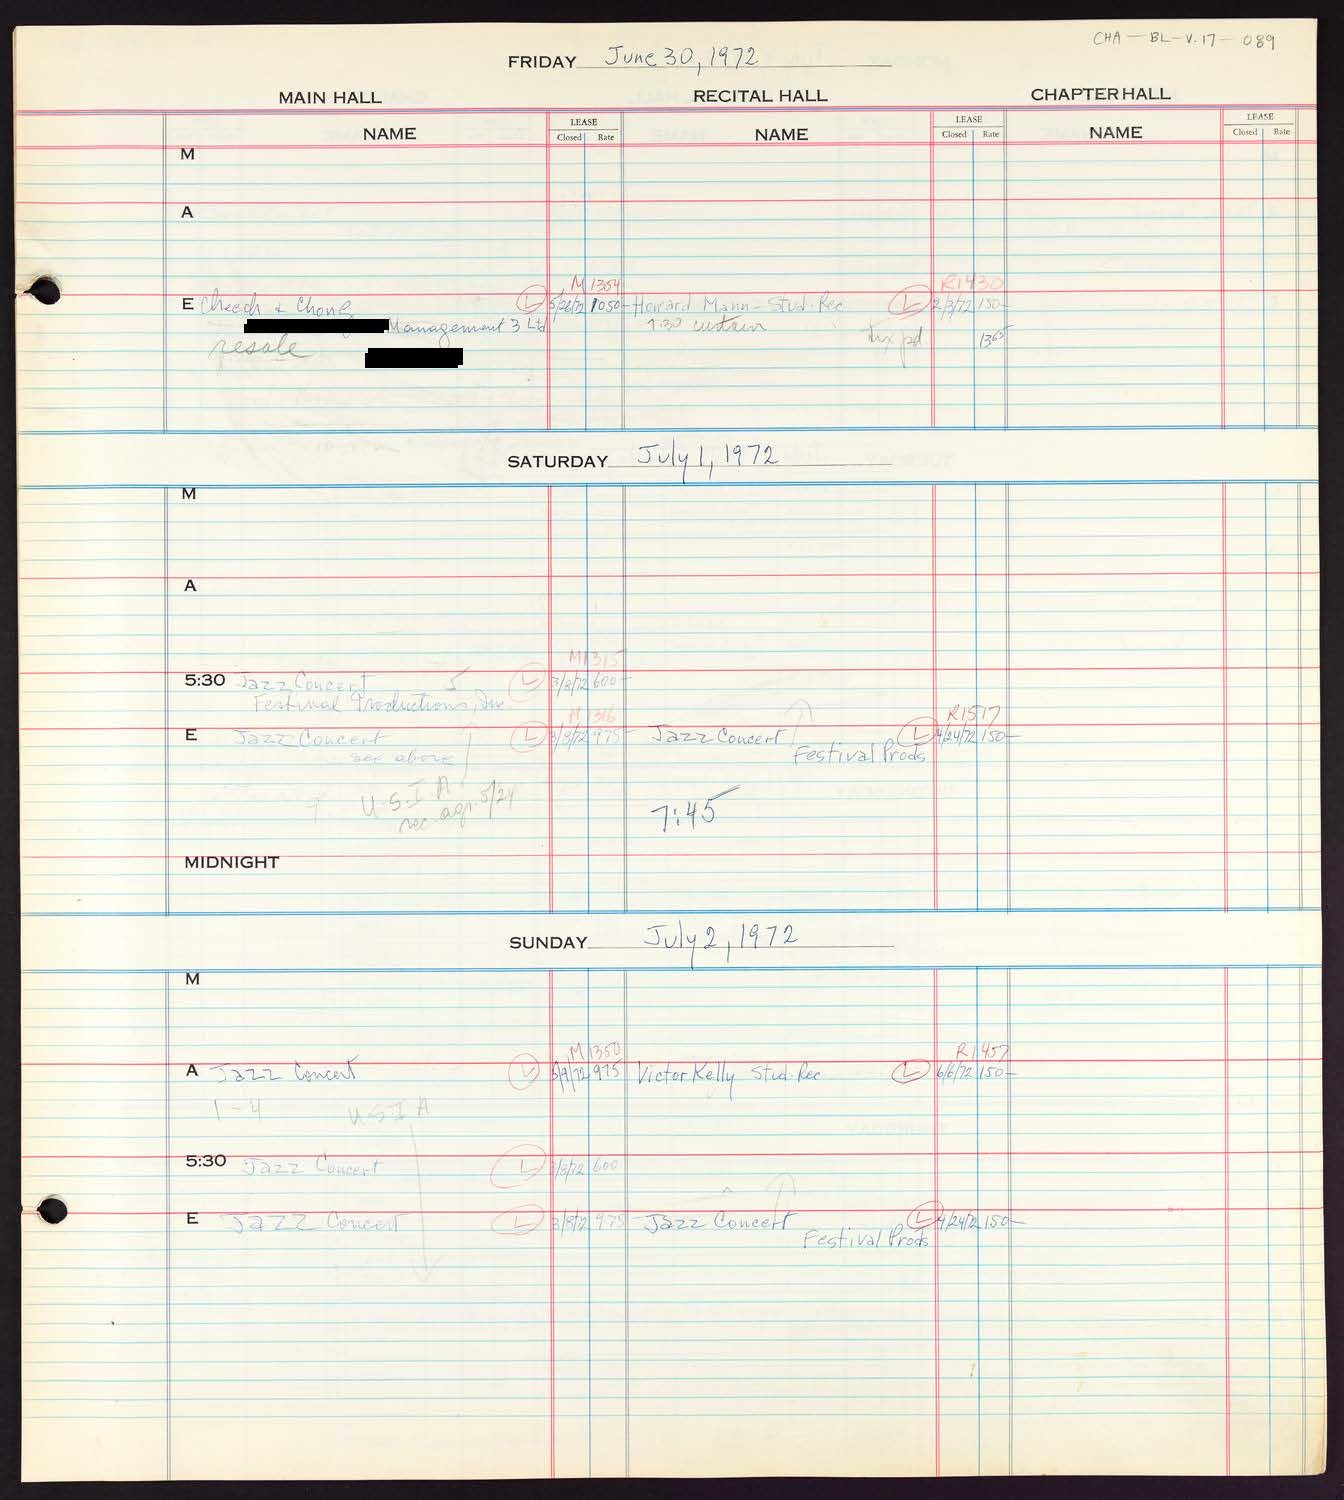 Carnegie Hall Booking Ledger, volume 17, page 89